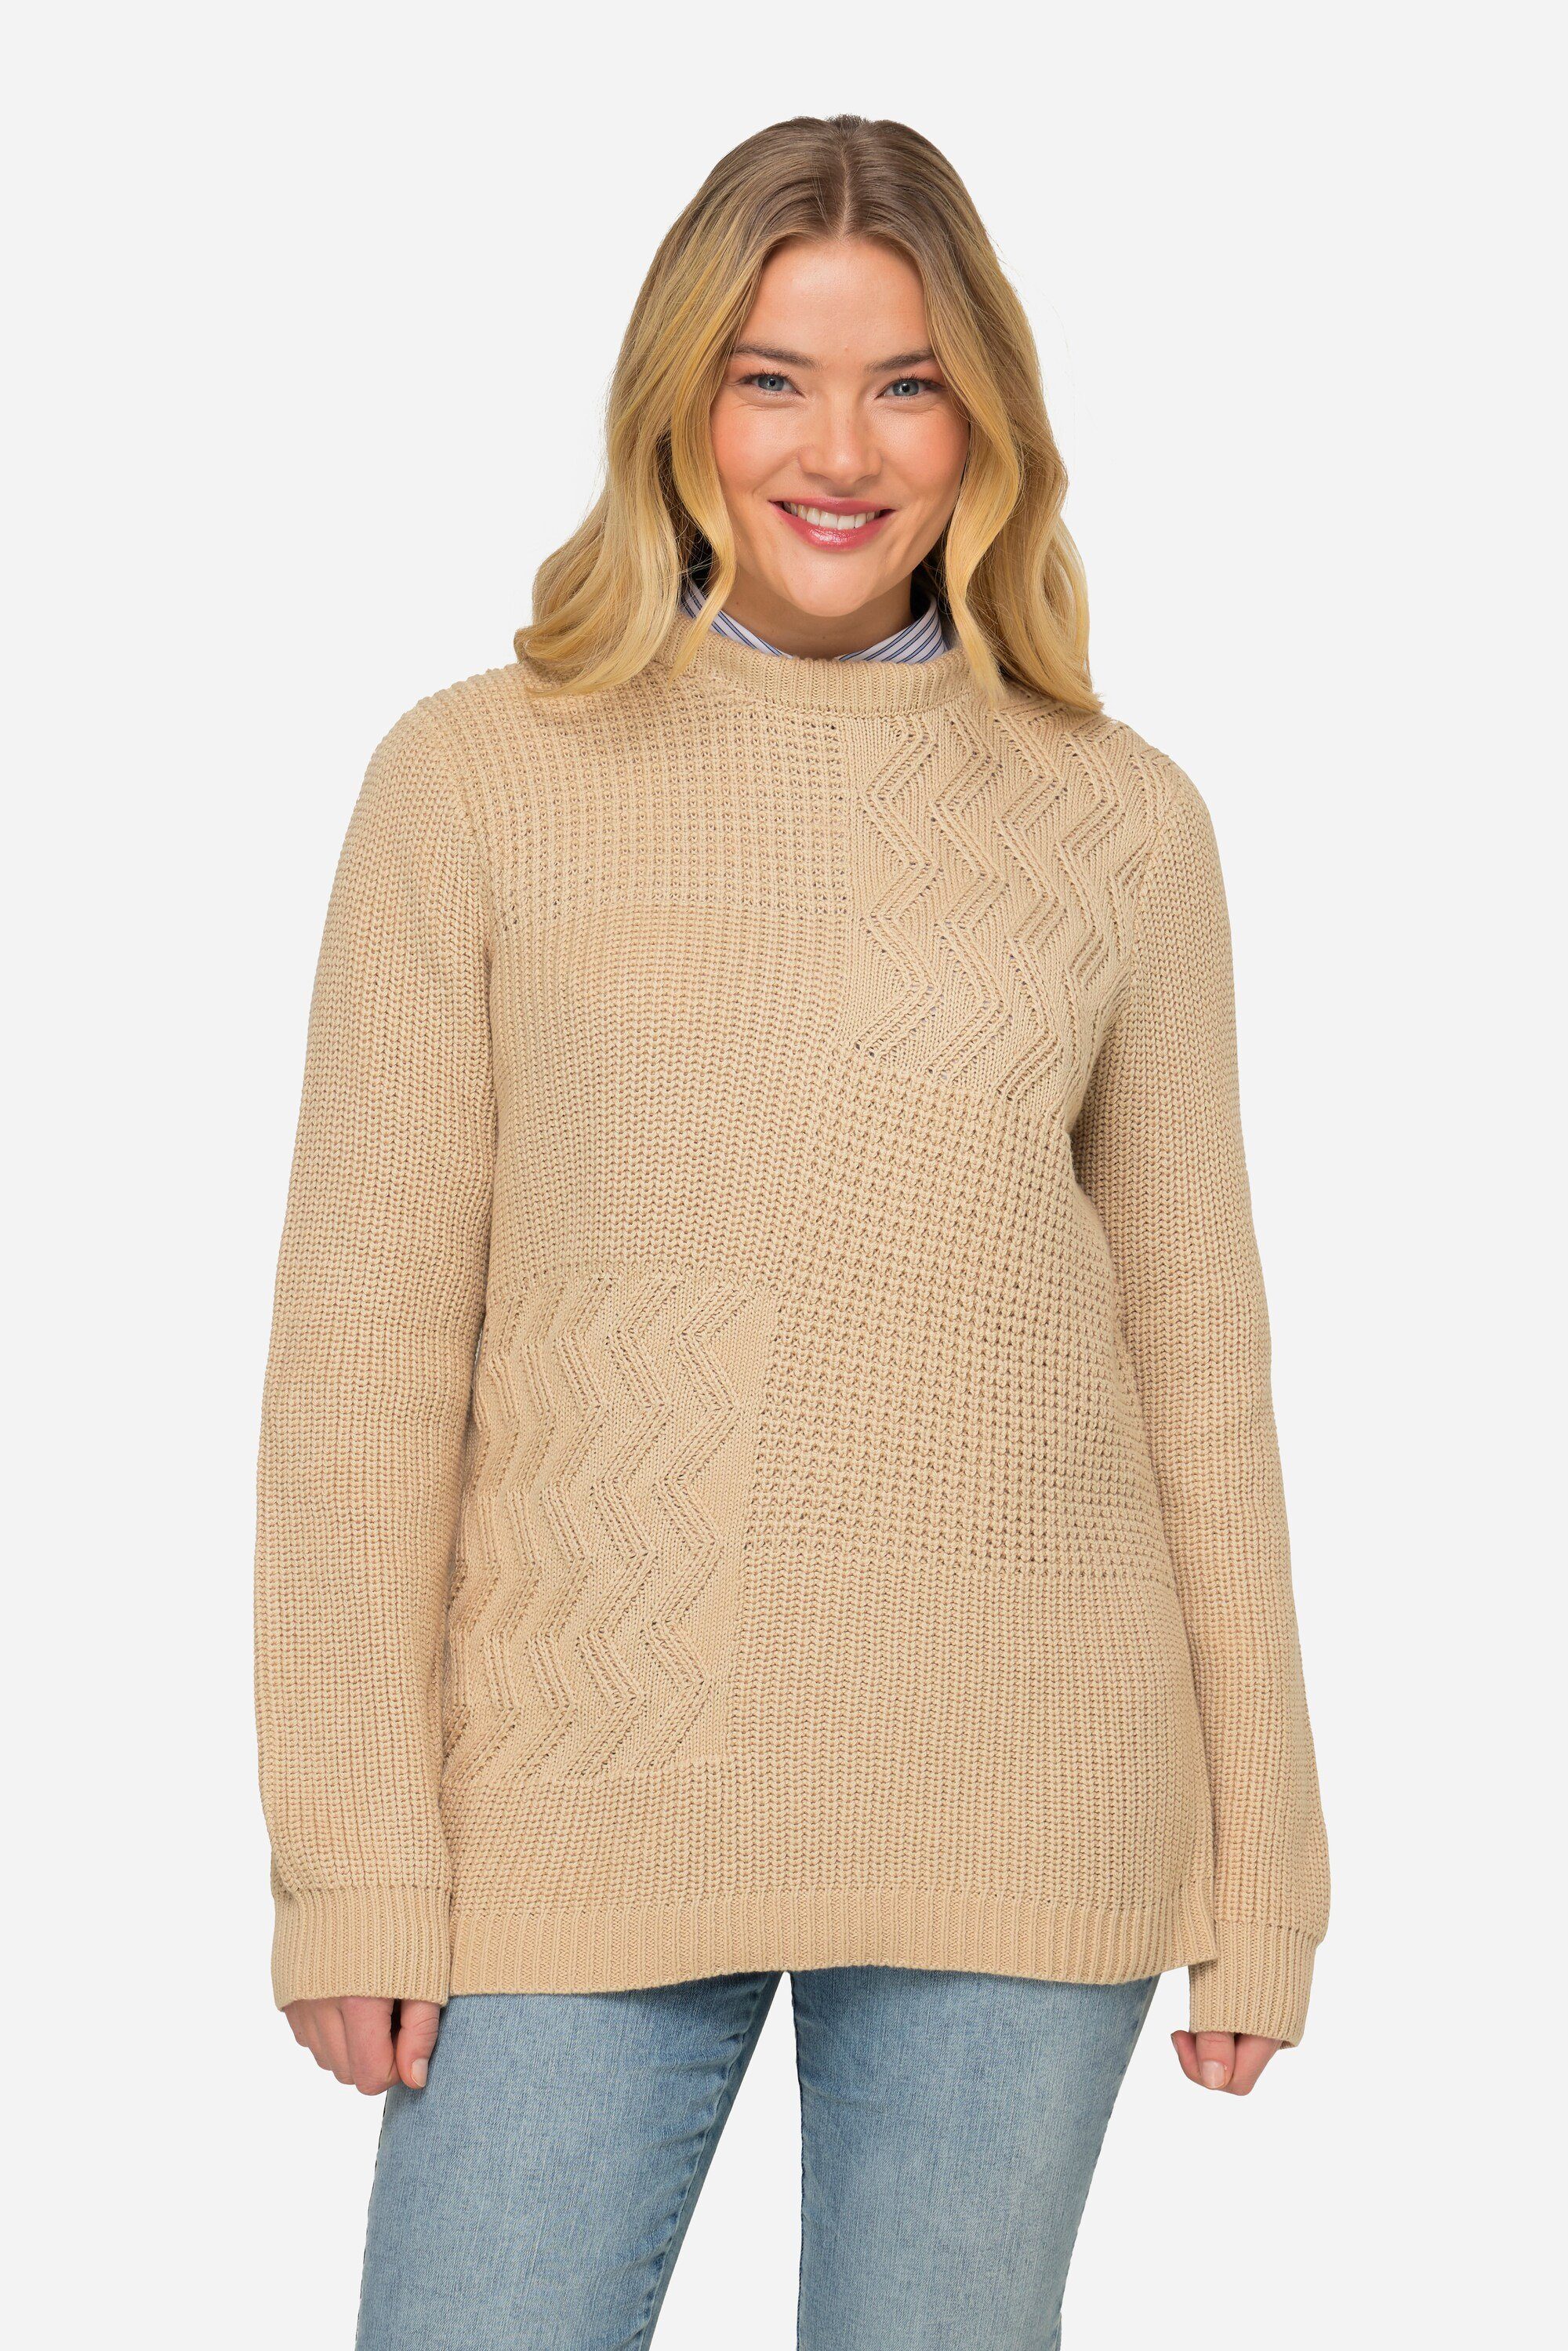 Laurasøn Strickpullover Pullover Patch-Look